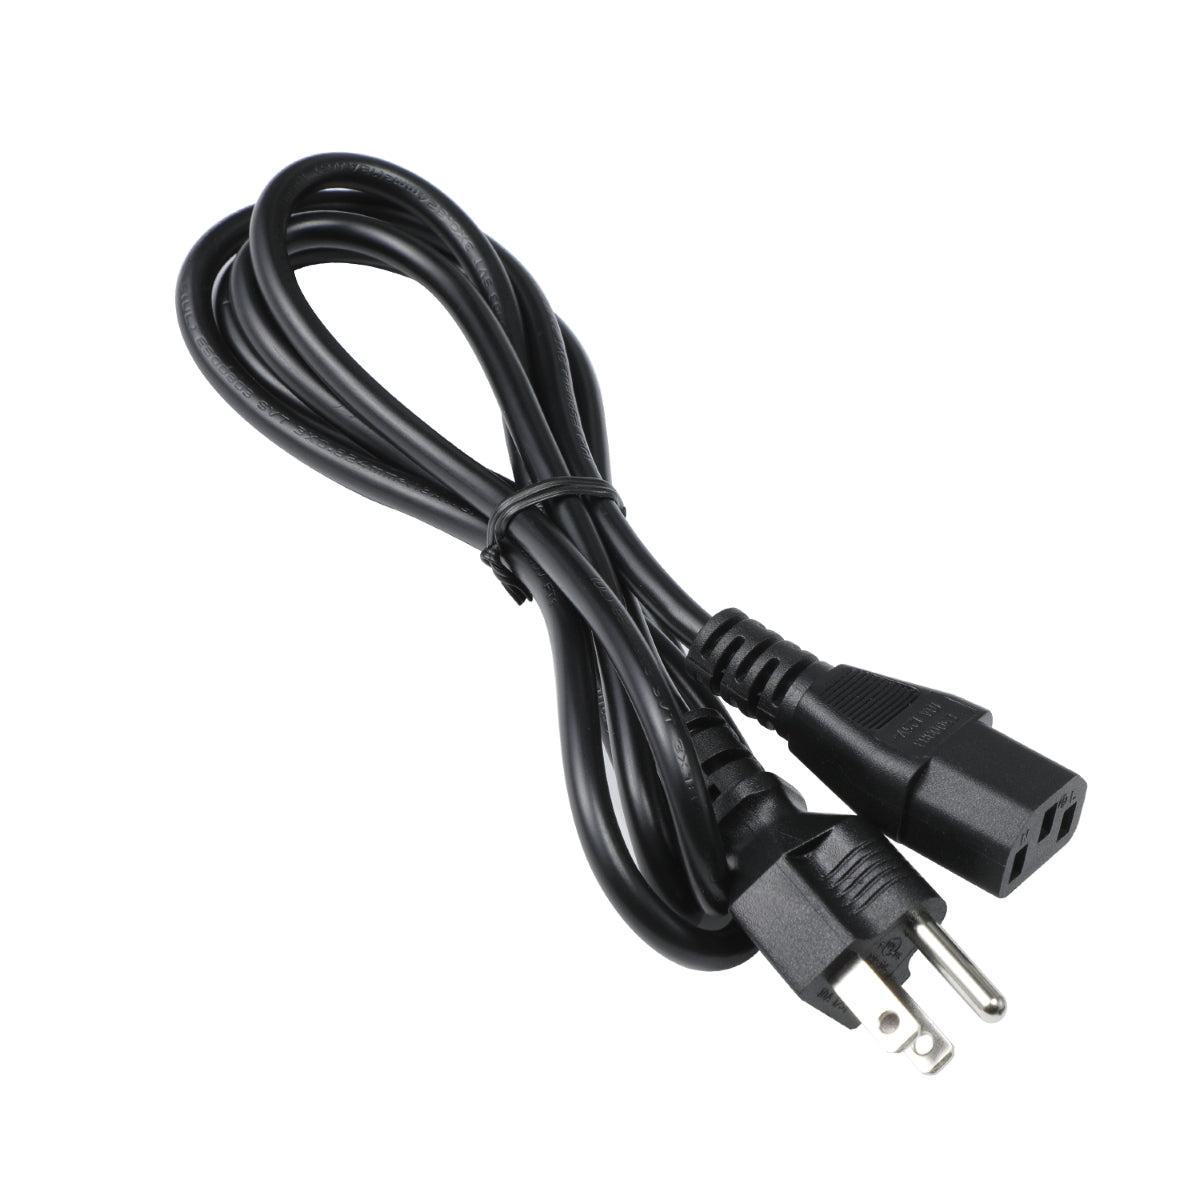 Power Cable for Philips 221B8LJEB Monitor.